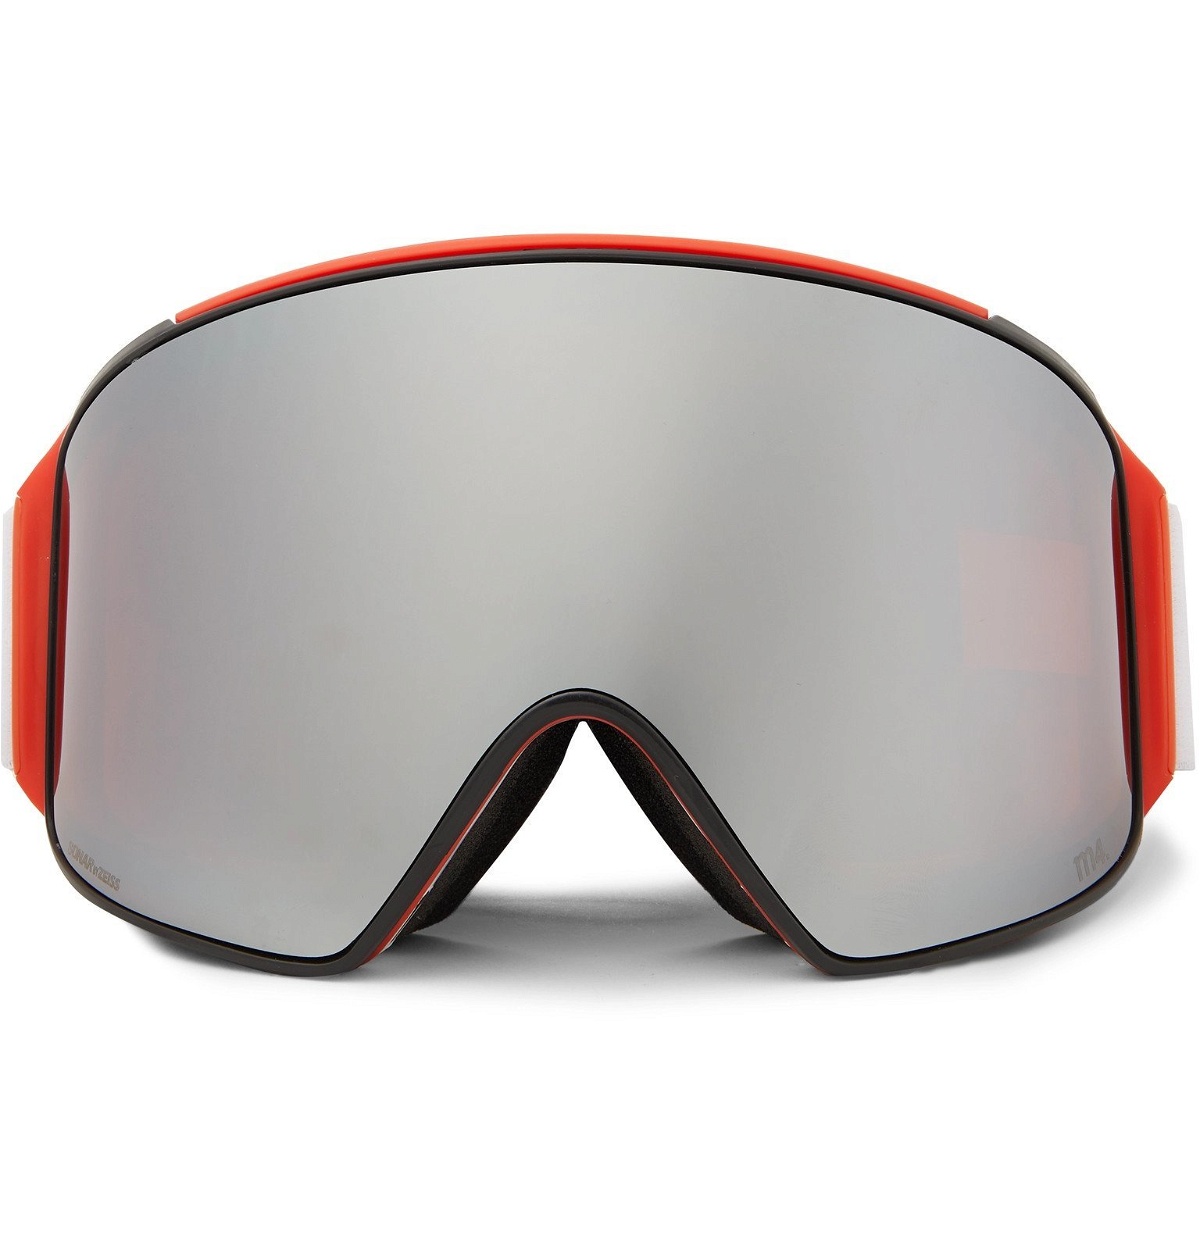 ANON M4 Cylindrical Ski Goggles and Stretch-Jersey Face Mask for Men